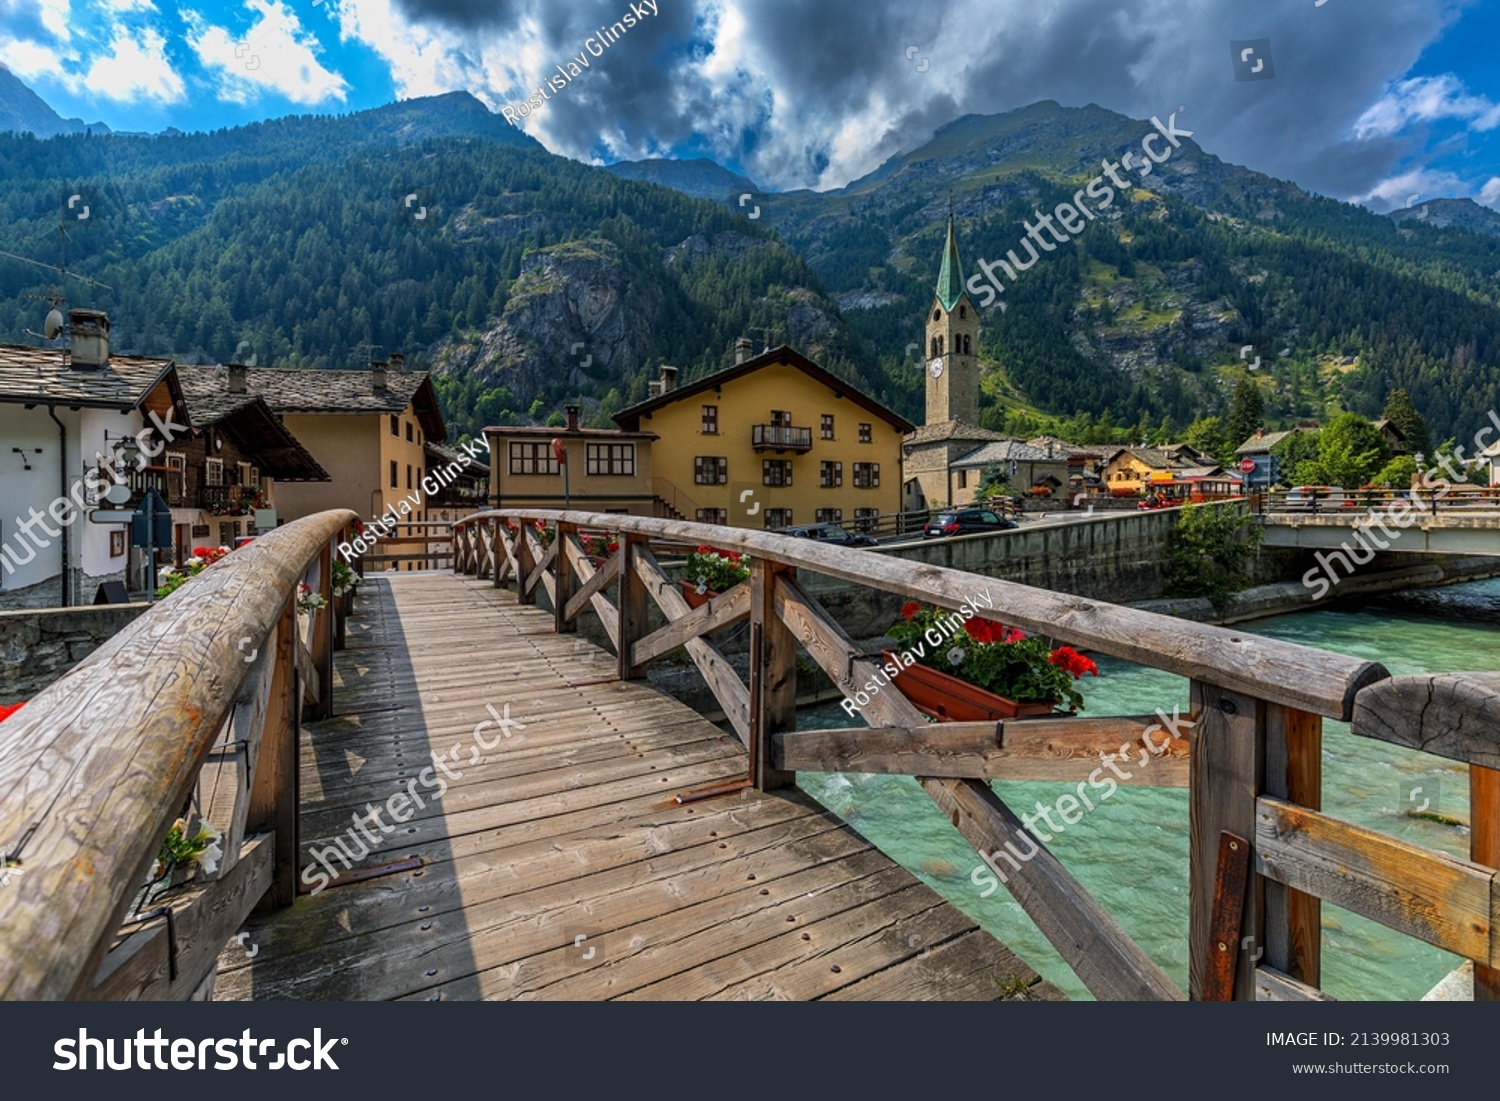 Wooden bridge over mountain river as houses and old church on background in small town of Gressoney-Saint-Jean in Aosta Valley, Italy. #2139981303